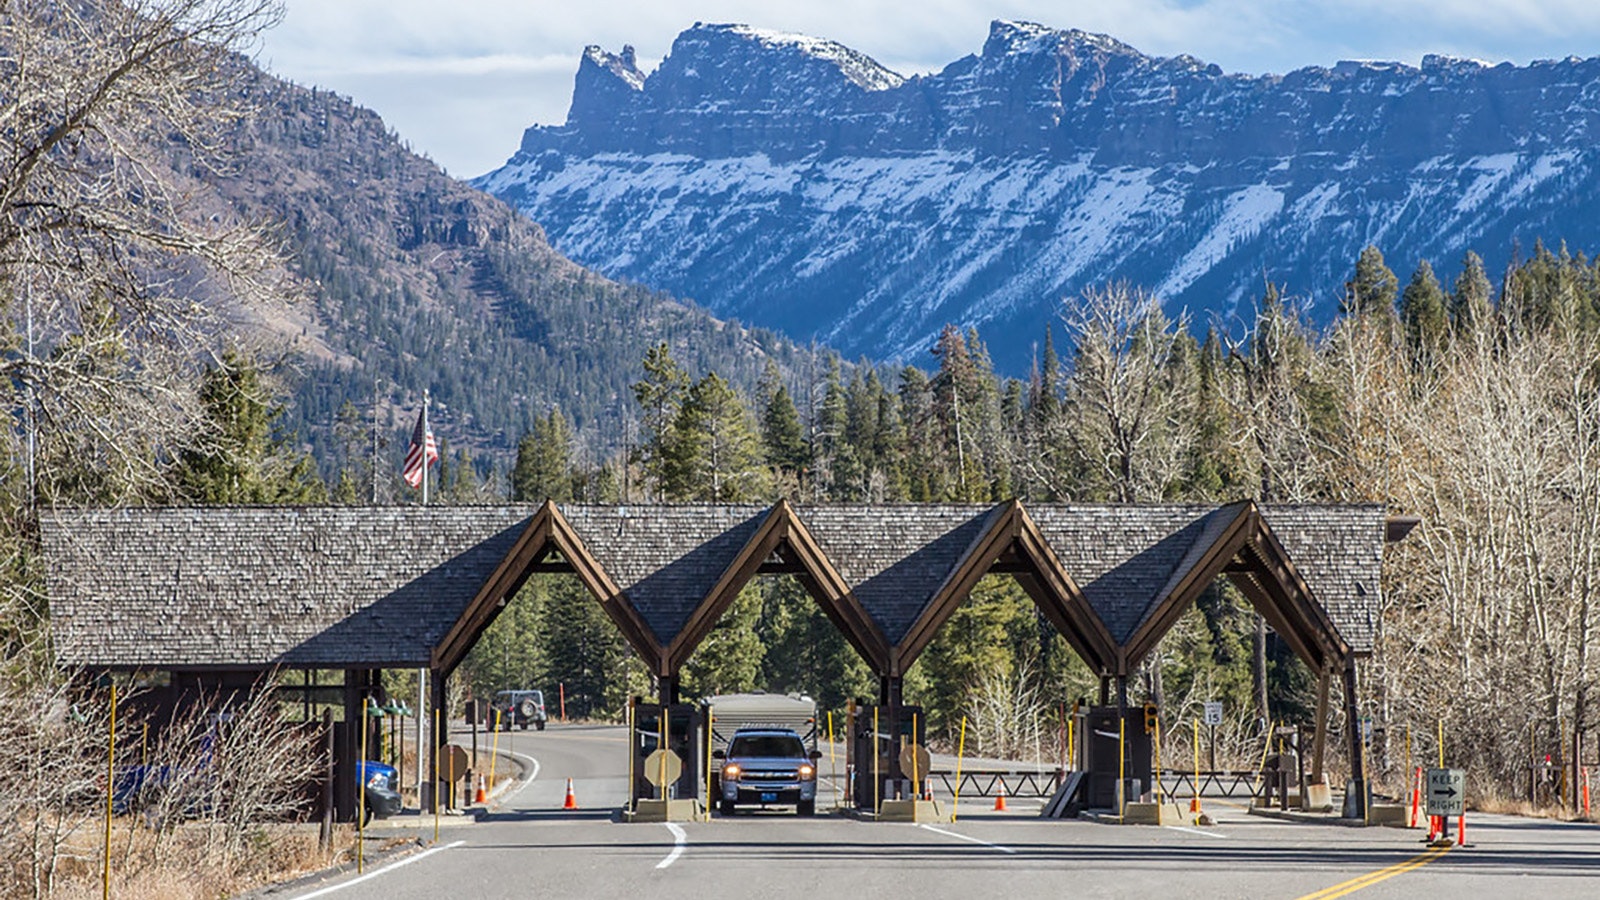 Although it's not considered the "peak" season for tourism in and around Yellowstone National Park, the October shoulder season has become much more popular. The East Gate, shown here, is open through October, usually closing the first Monday in November.